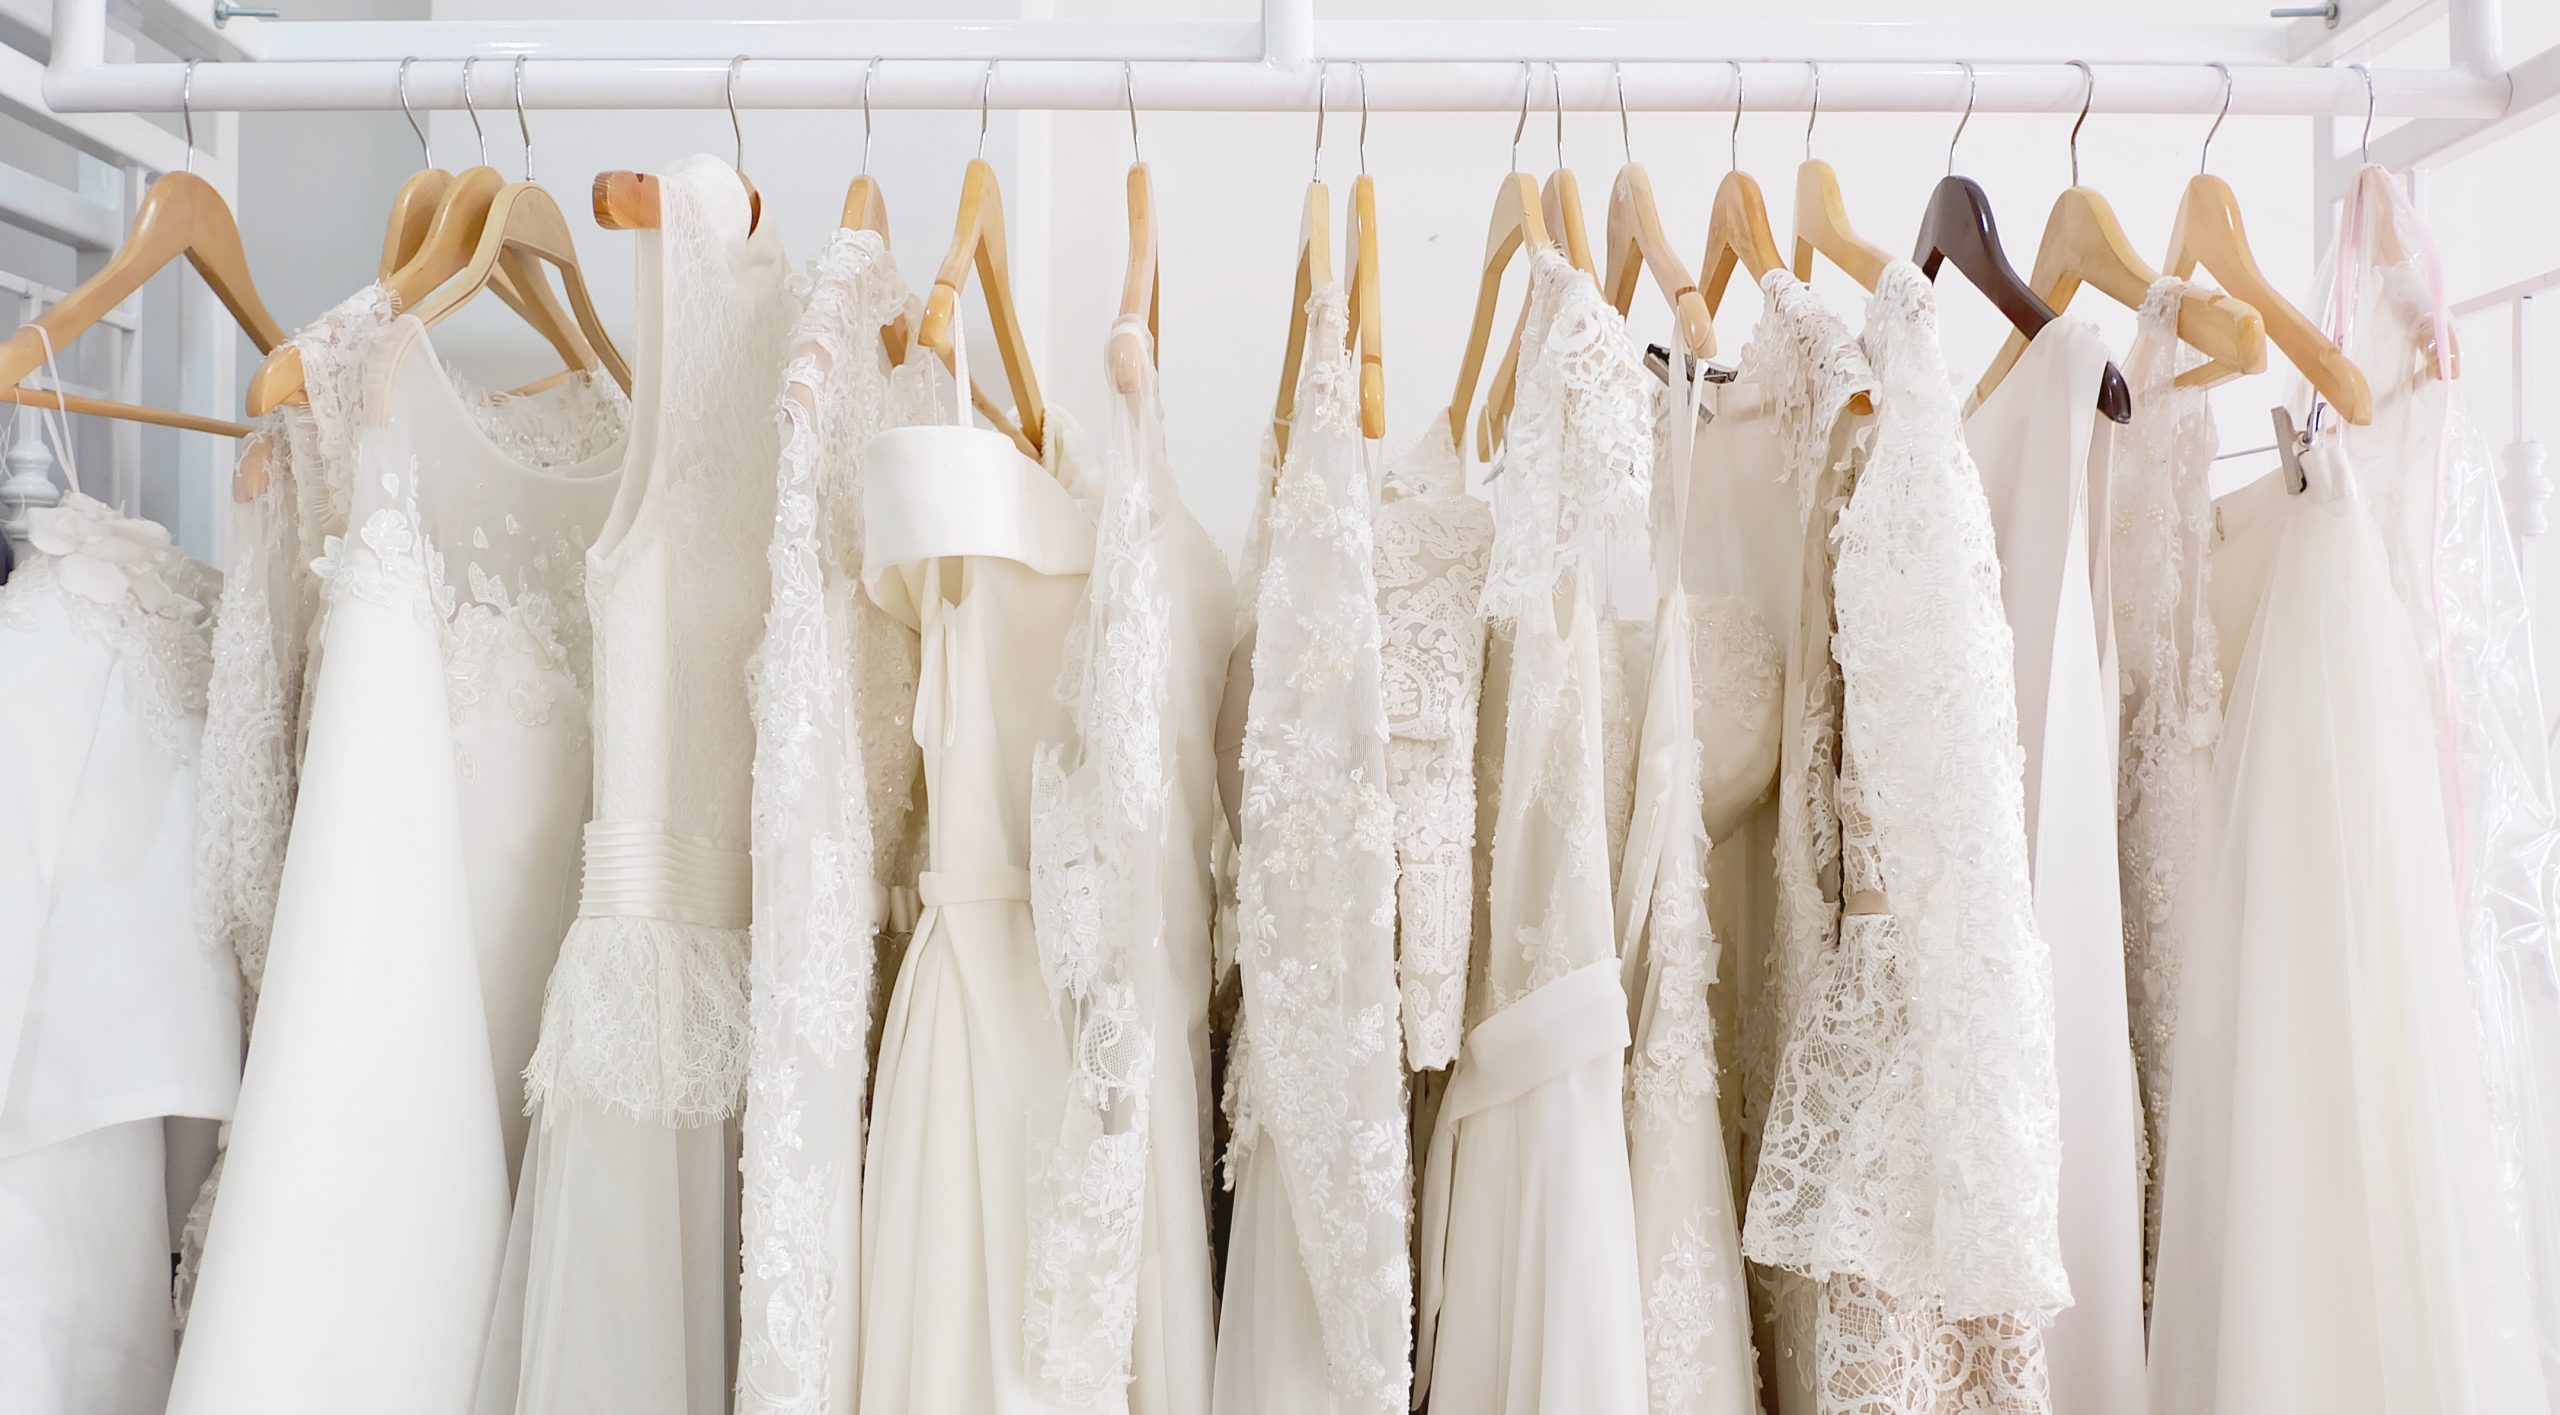 5 Reasons To Shop Early For Your Wedding Dress